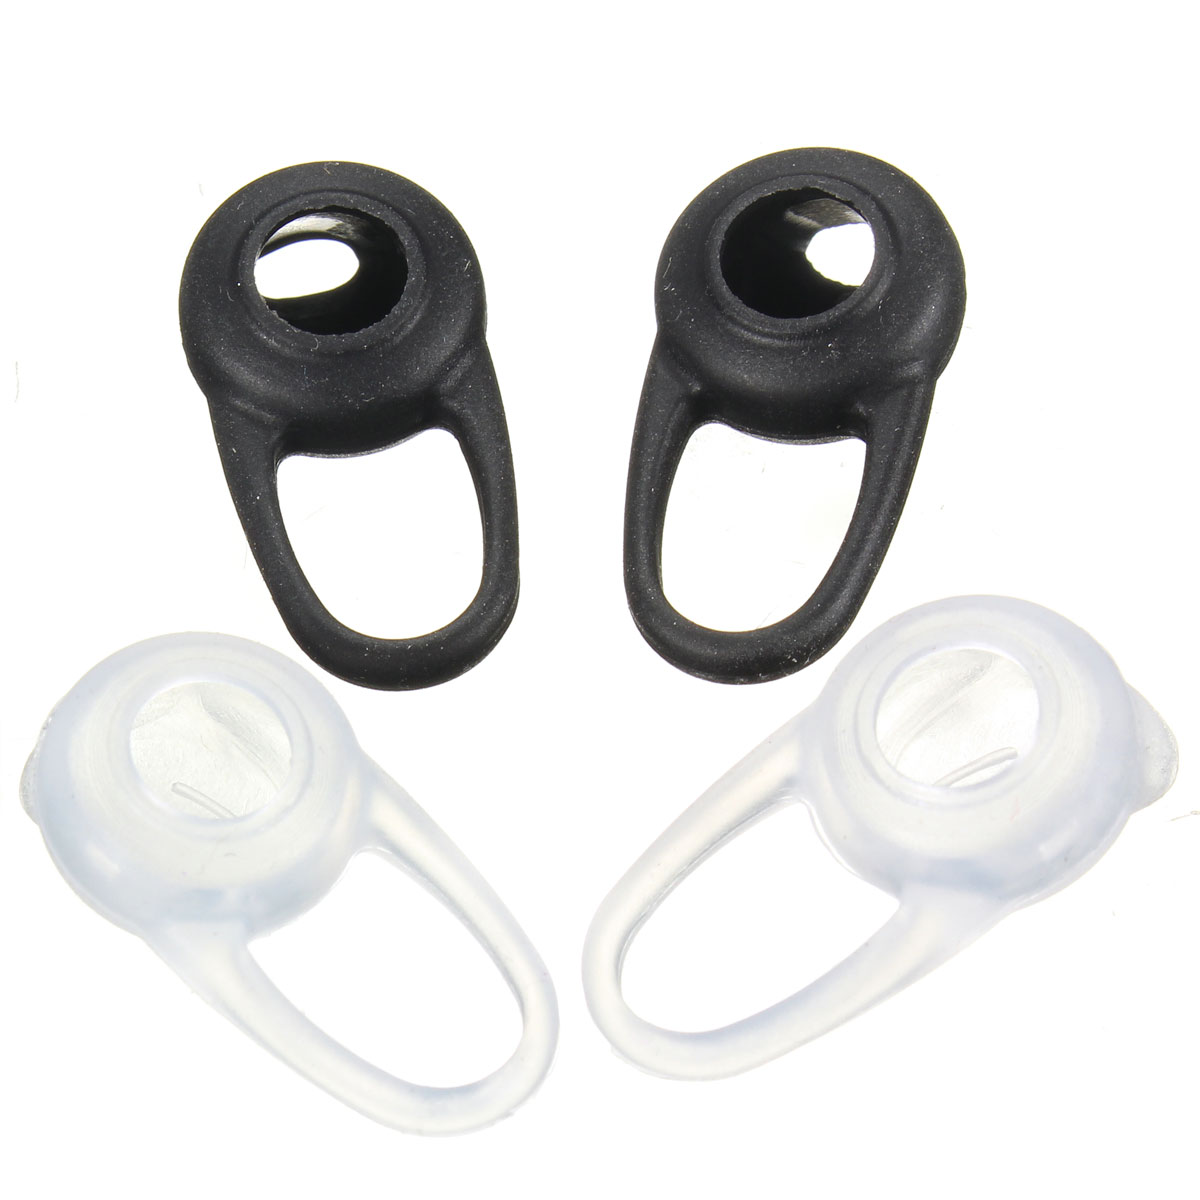 2pcs-Silicone-Earphone-Covers-Cap-Replacement-Earbud-Bud-Tips-Earbuds-Eartips-Earplug-Ear-Pads-1974853-2